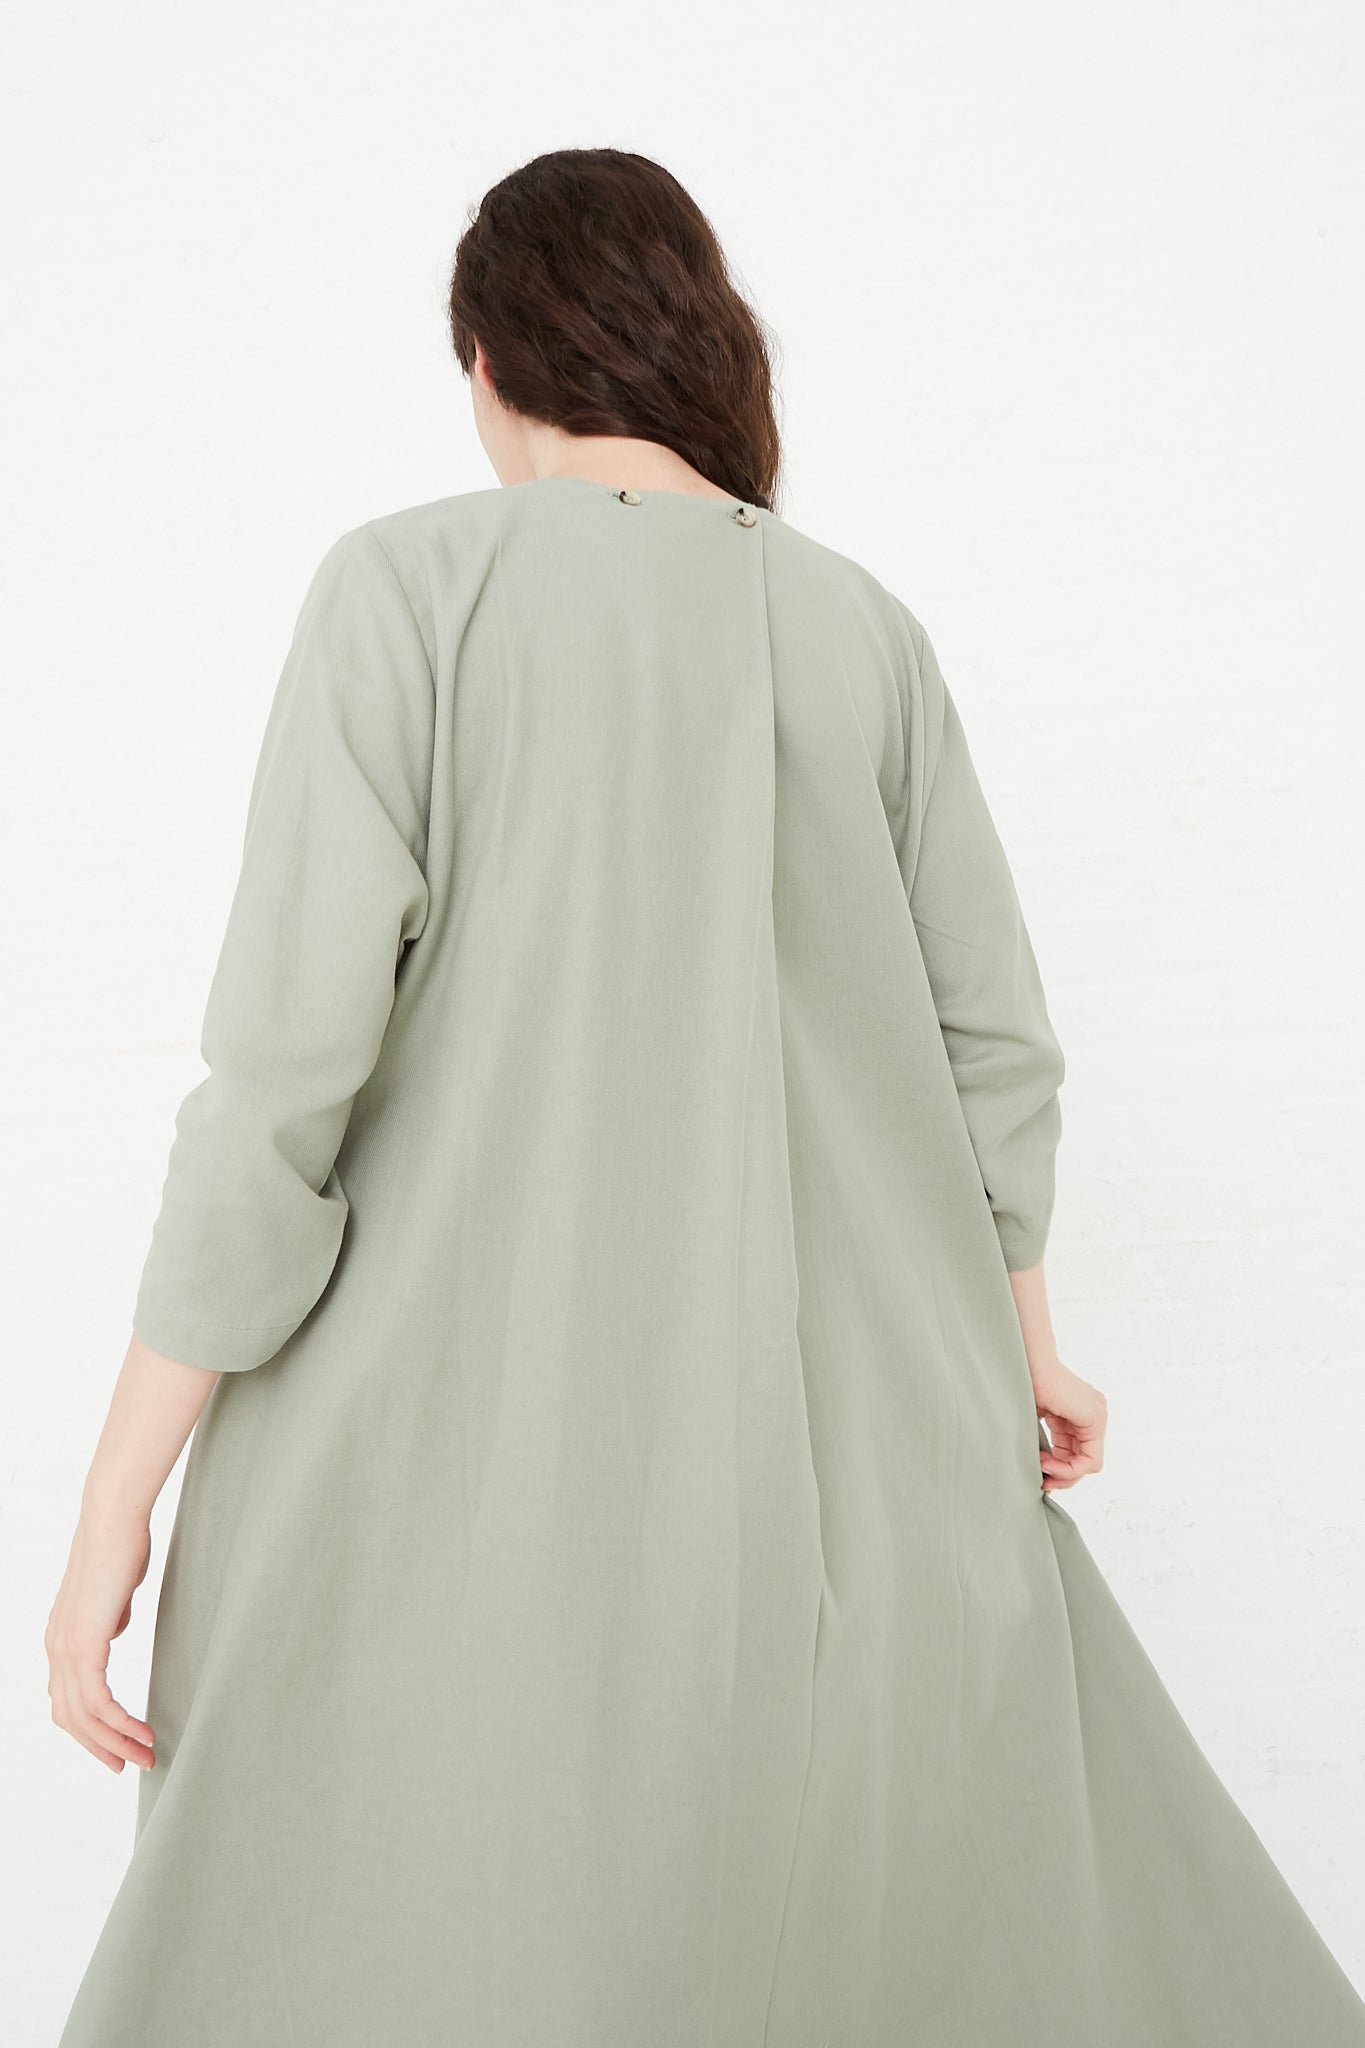 Cotton Twill Shirred Neck Dress in Agave by Black Crane for Oroboro Back